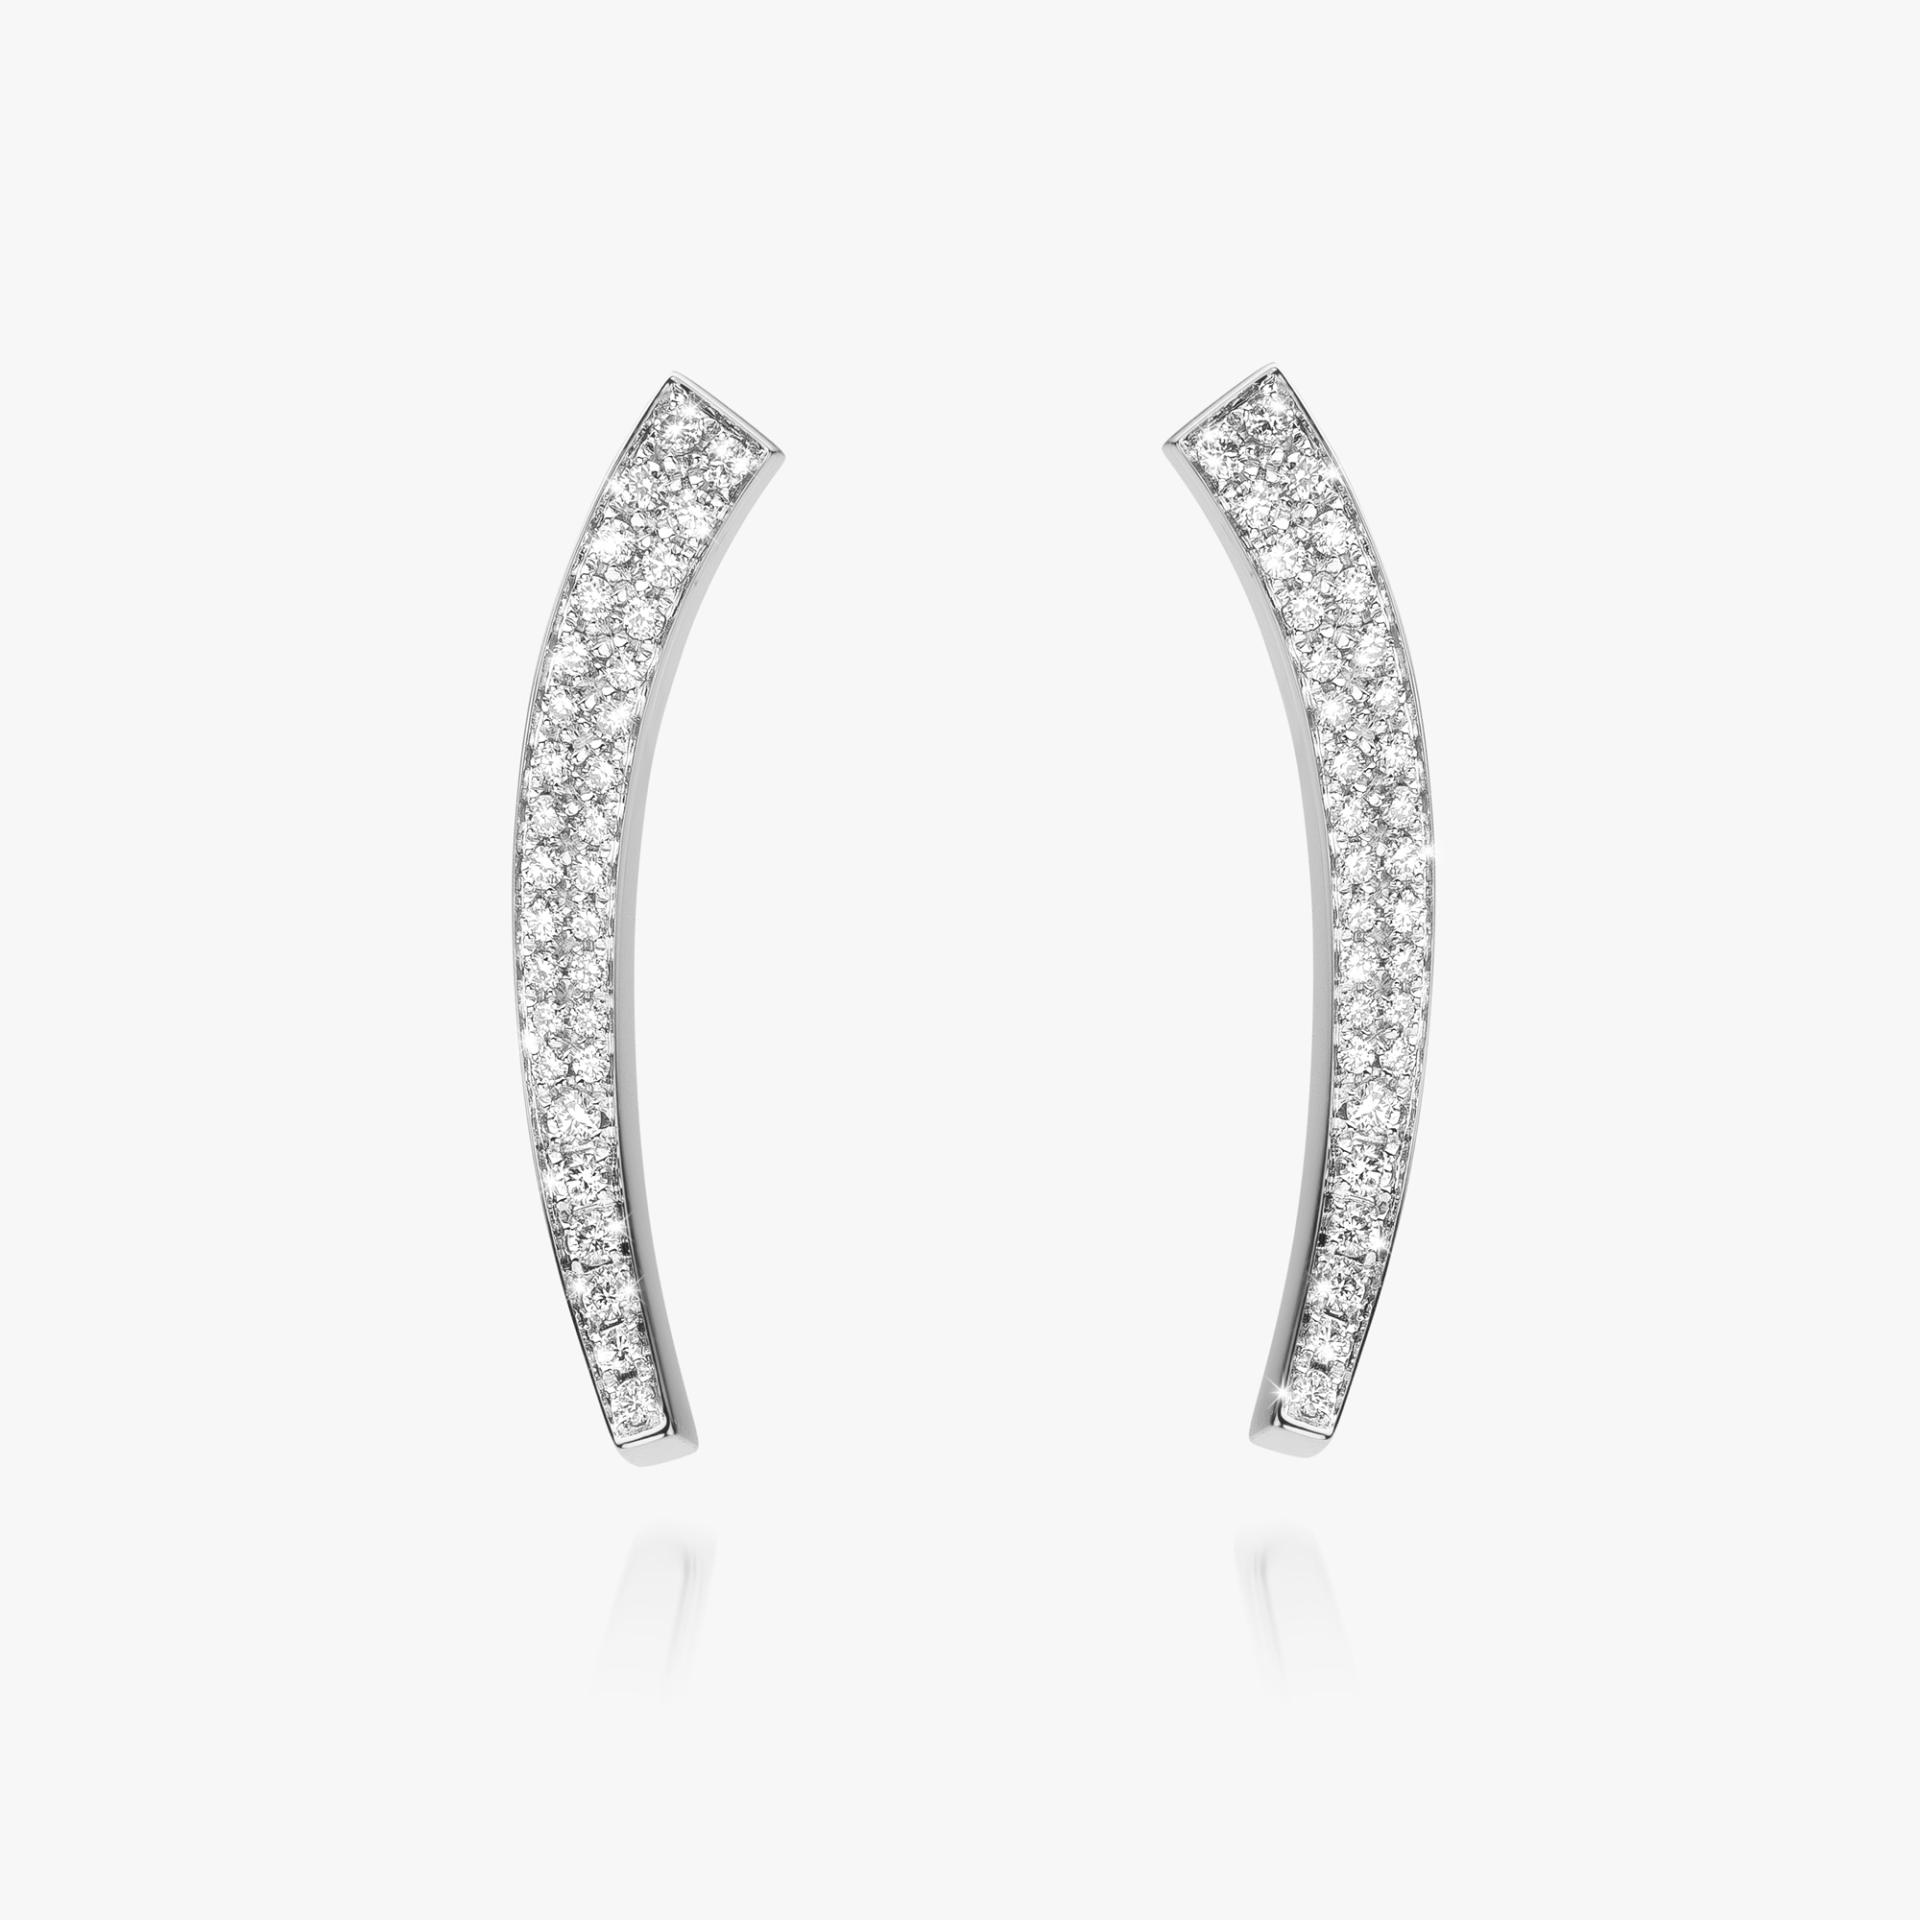 White gold earrings set with diamonds made by Maison De Greef